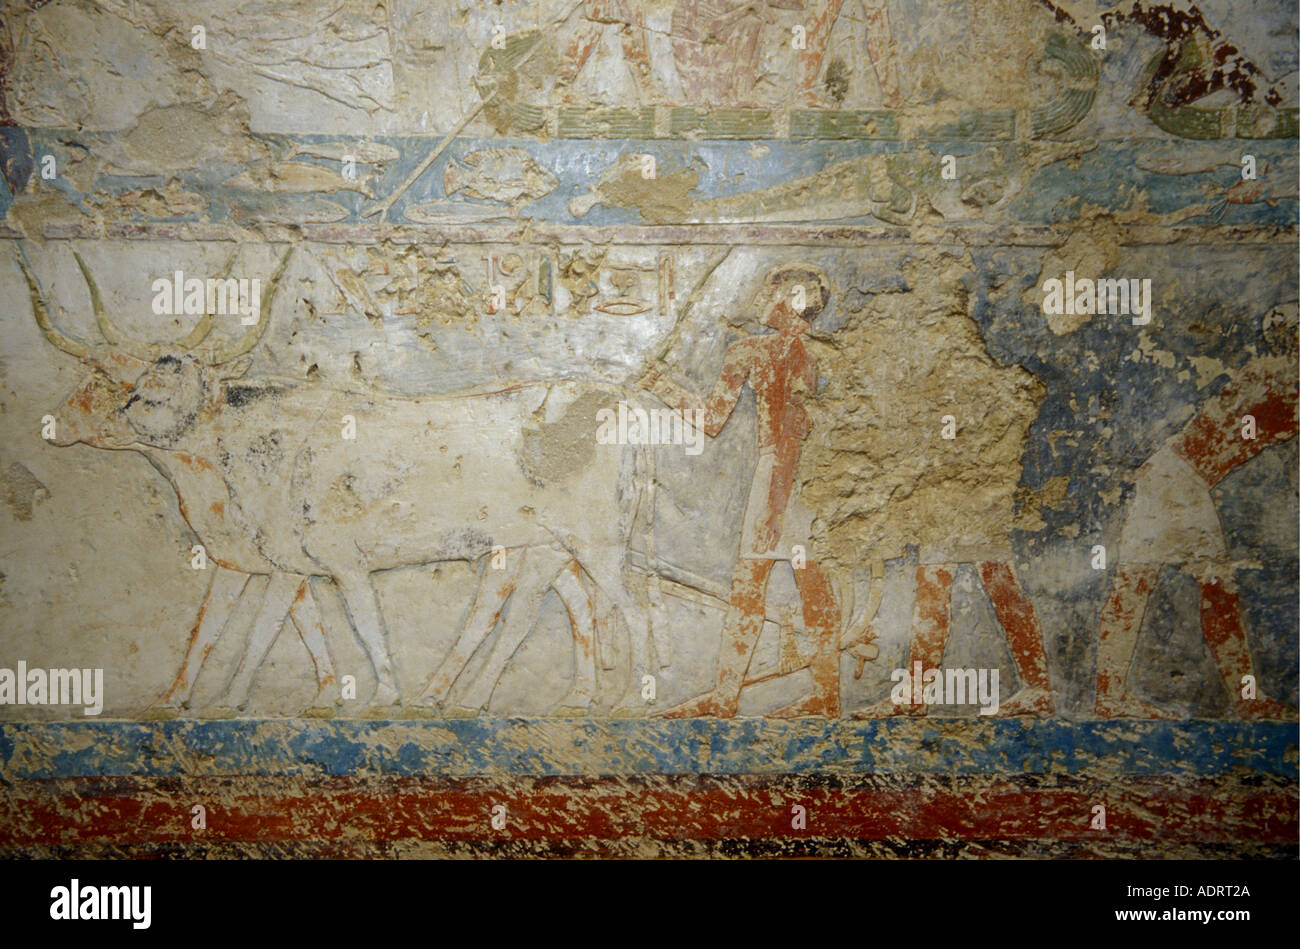 Egypt murals of farm life under the Pharaohs in the cave tombs at Mir, Middle Egypt are dated from 6-12th dynasties. Stock Photo